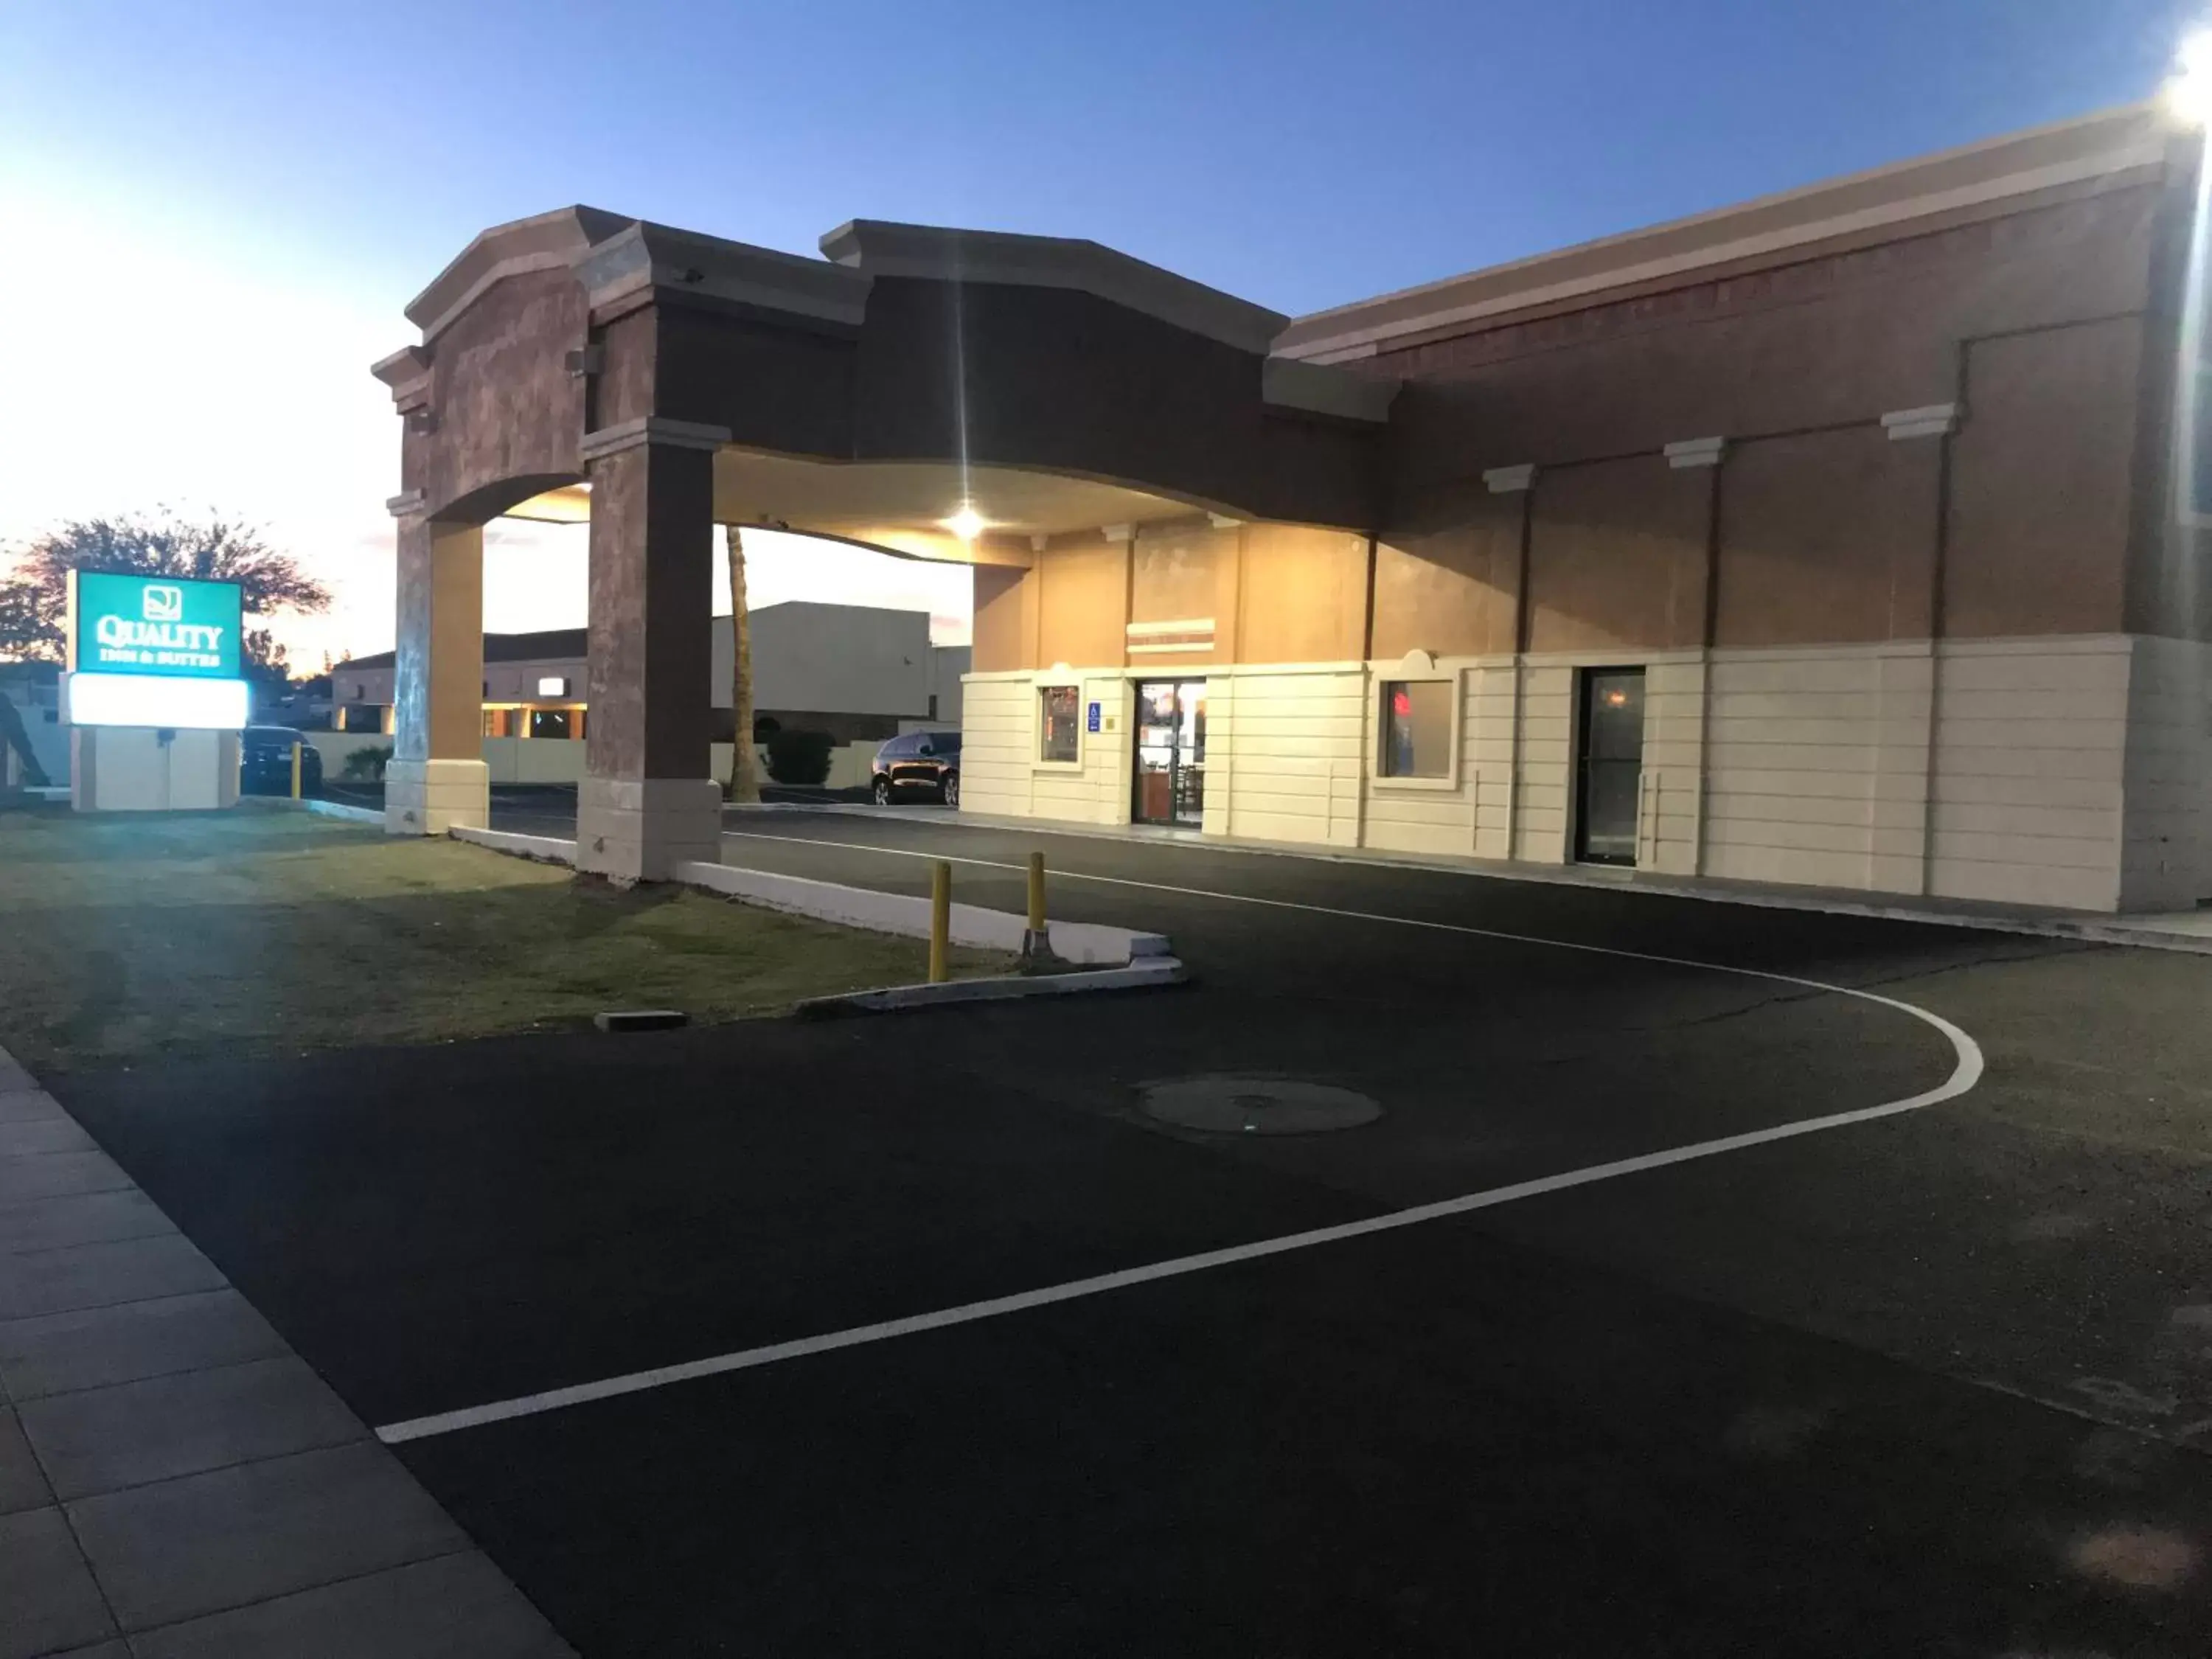 Property Building in Quality Inn & Suites near Downtown Mesa